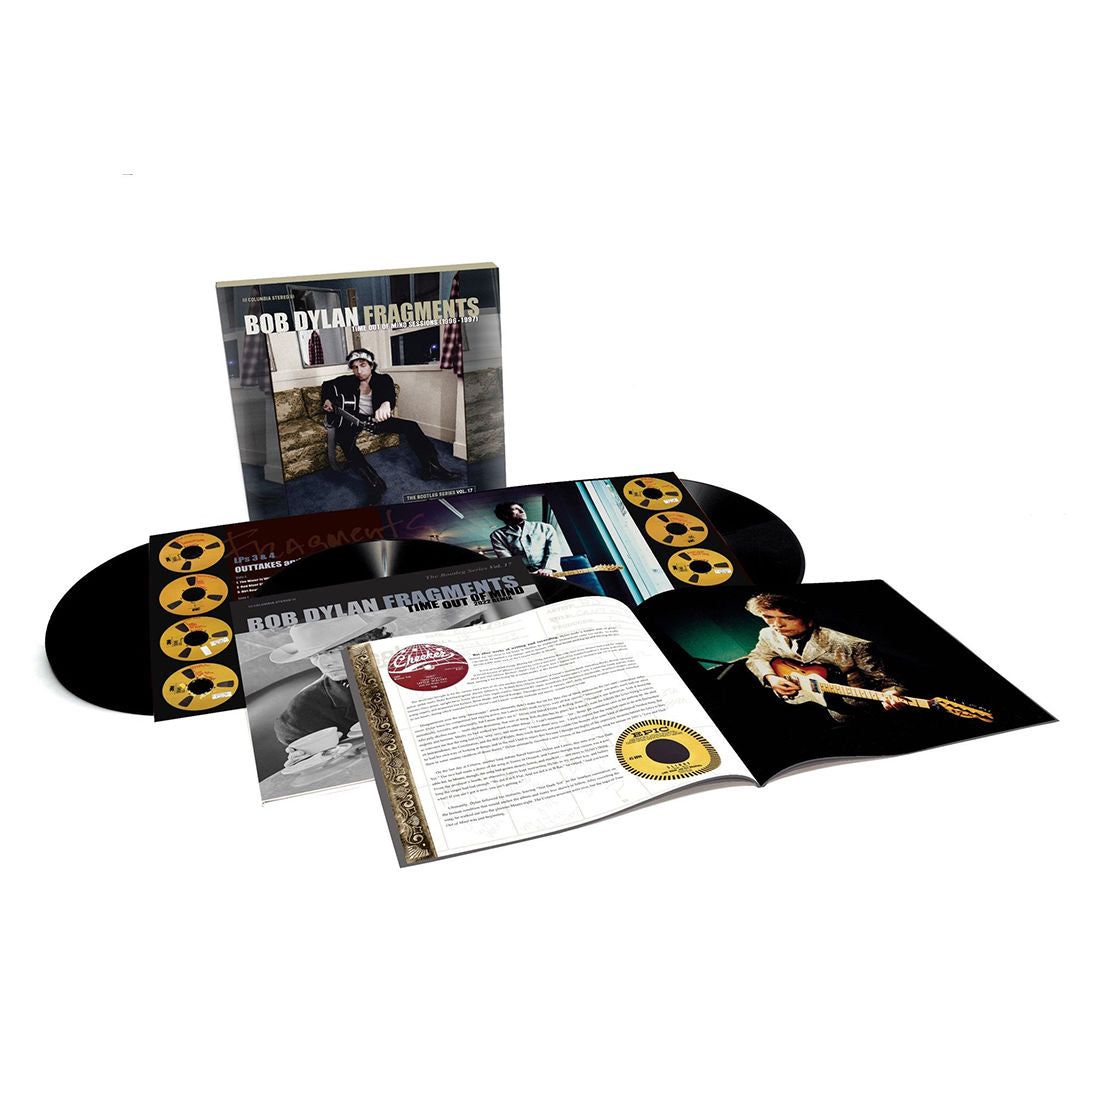 Bob Dylan - Fragments: Time Out of Mind Sessions (1996-1997) The Bootleg Series Vol.17: Limited Vinyl 4LP